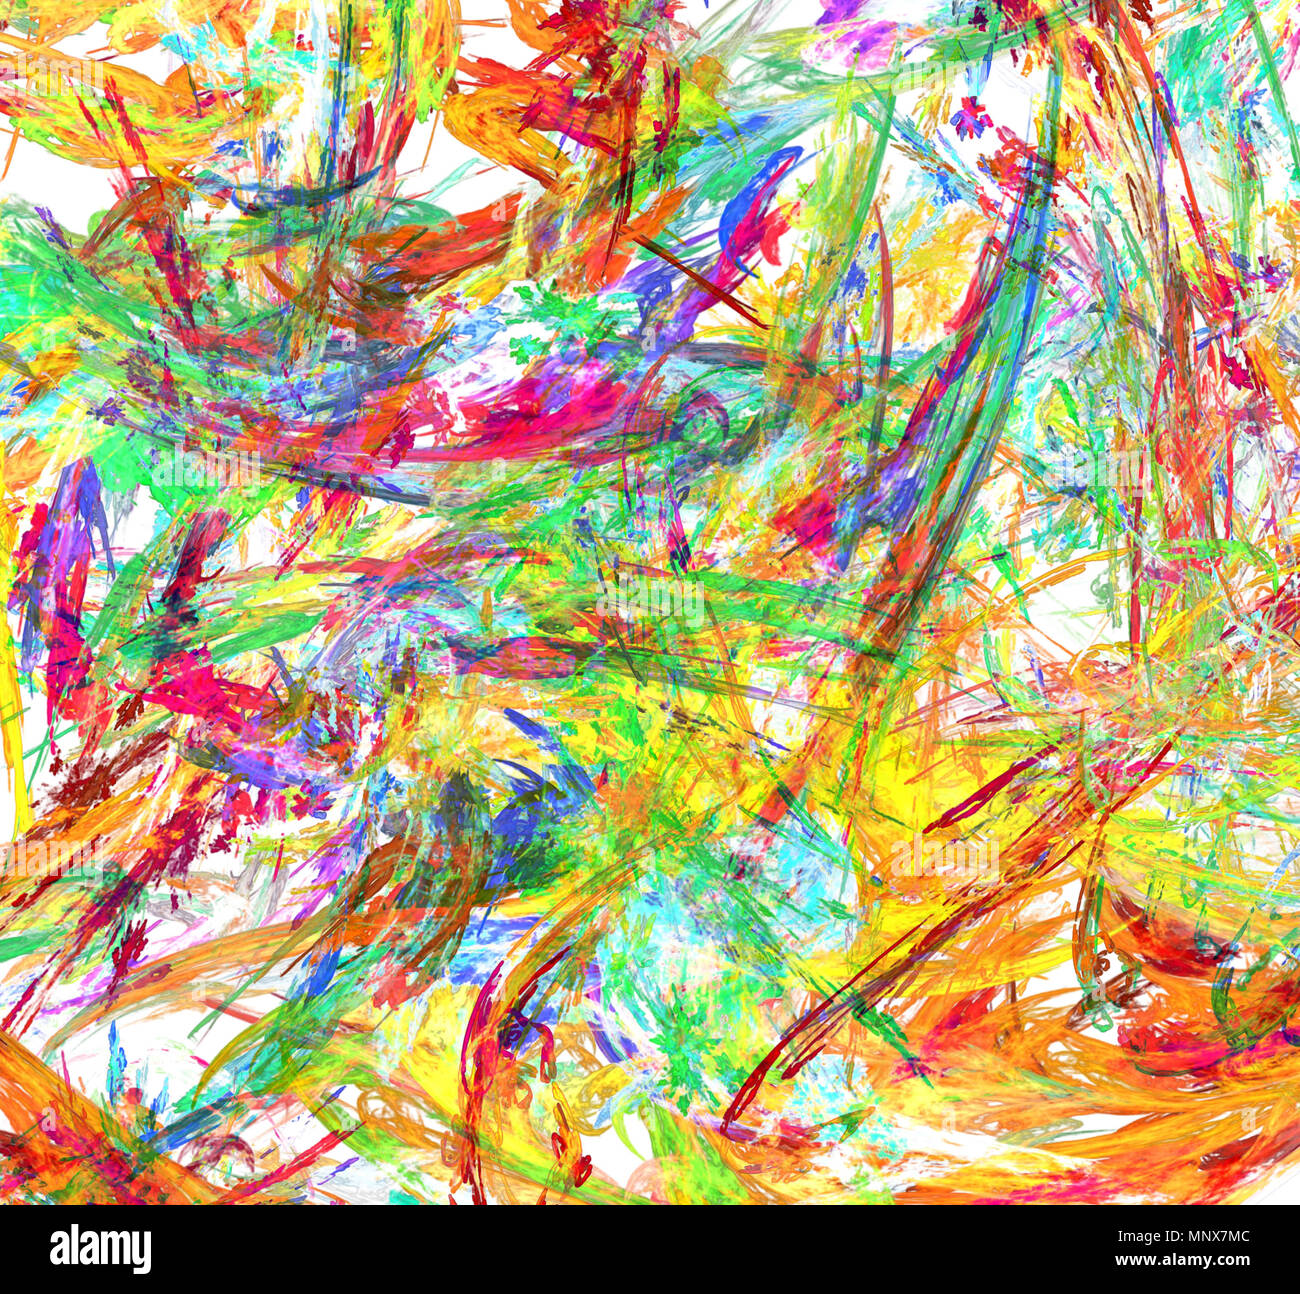 Paint splatter chaos abstract, many color horizontal background Stock Photo